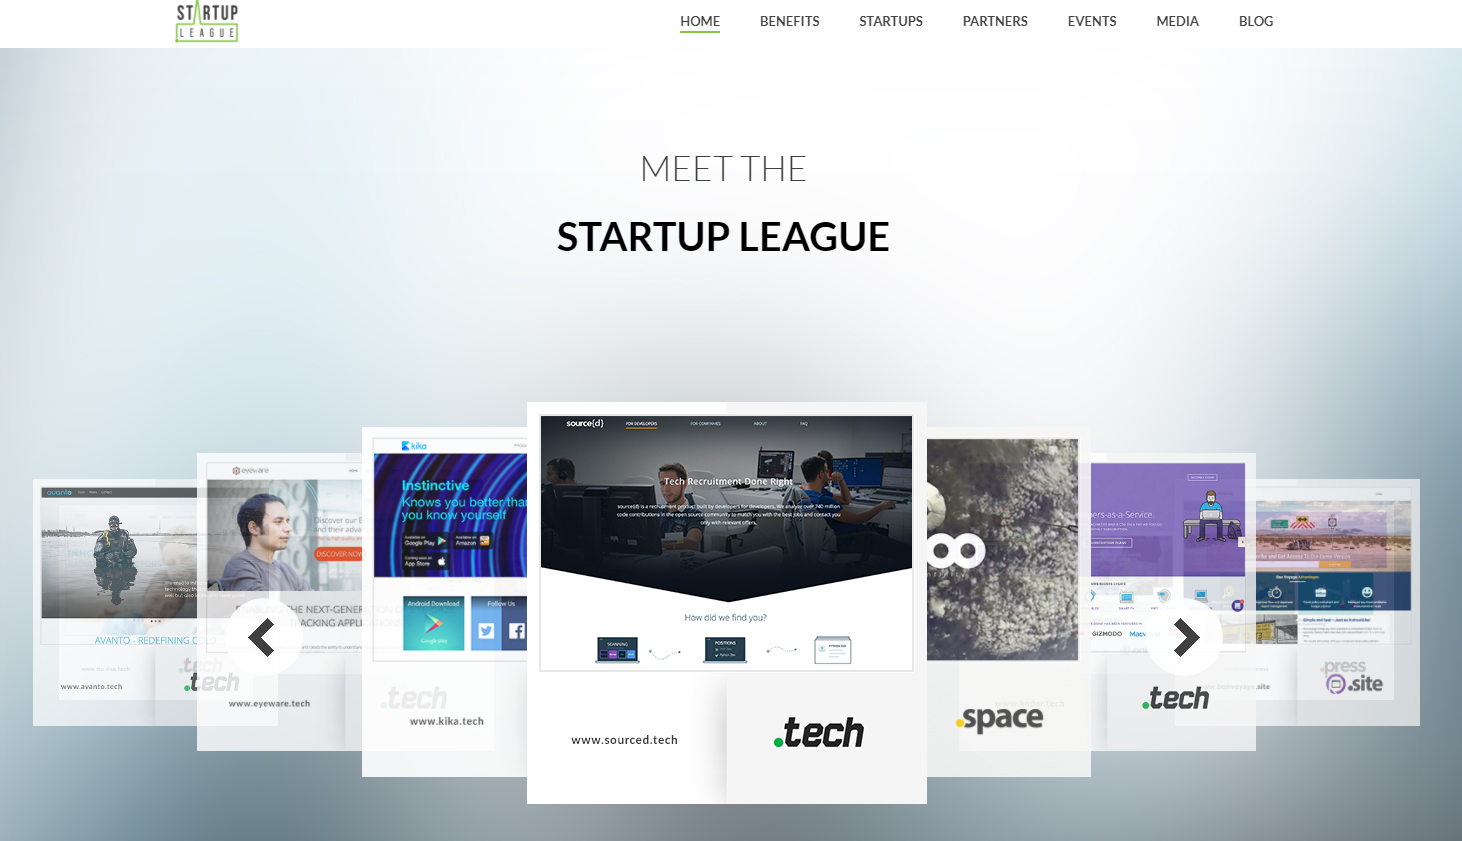 The Startup Leageue